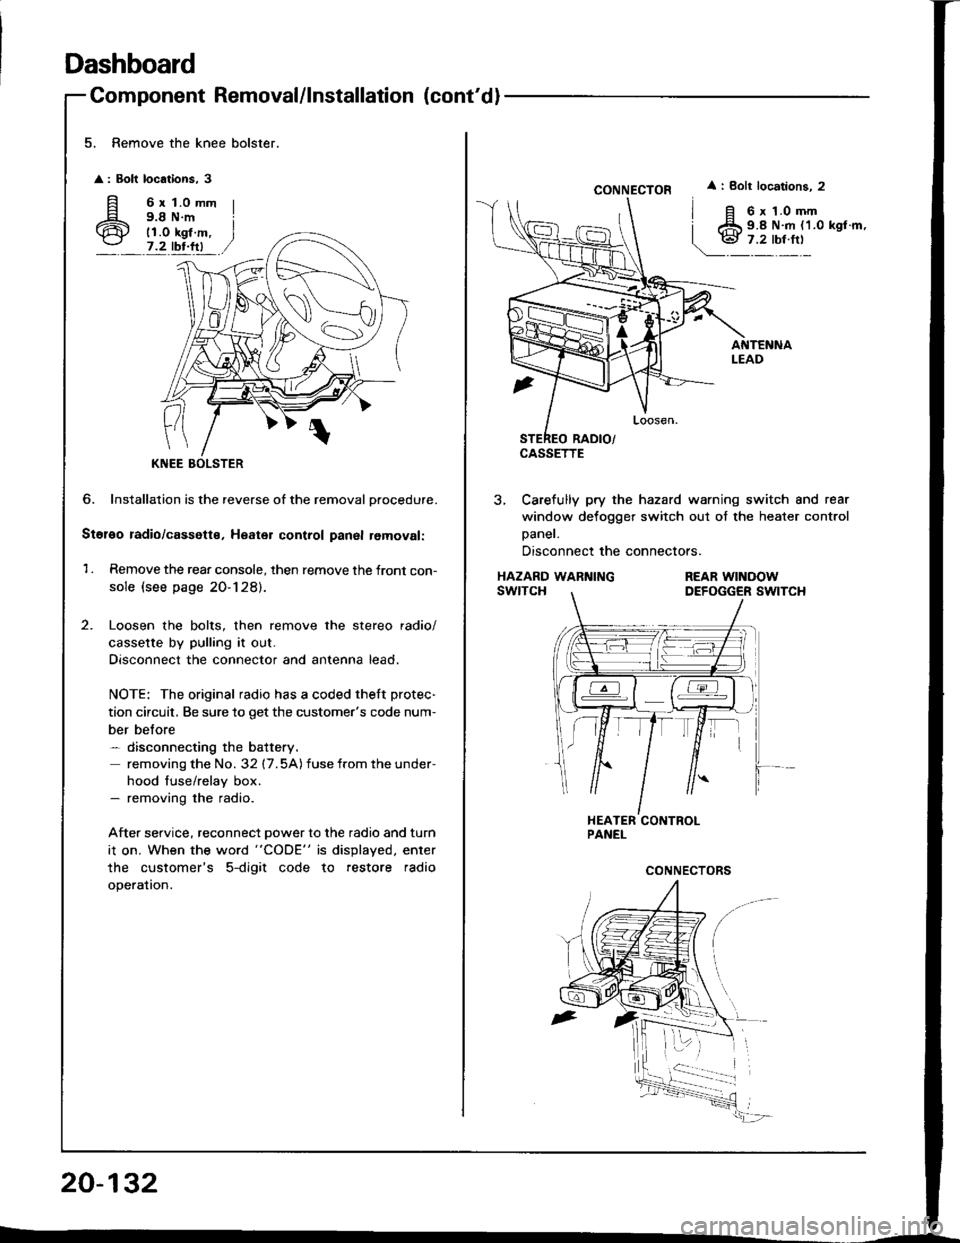 HONDA INTEGRA 1994 4.G Owners Guide Dashboard
Component Removal/lnstallation (contdl
5. Remove the knee bolster.
 
 
: Bolt locations, 3
fi 6rt.omm
6 i;ii#.,7.2 tbr.ftl
?
KNEE
6. Installation is the reverse of the removal Drocedure.
S